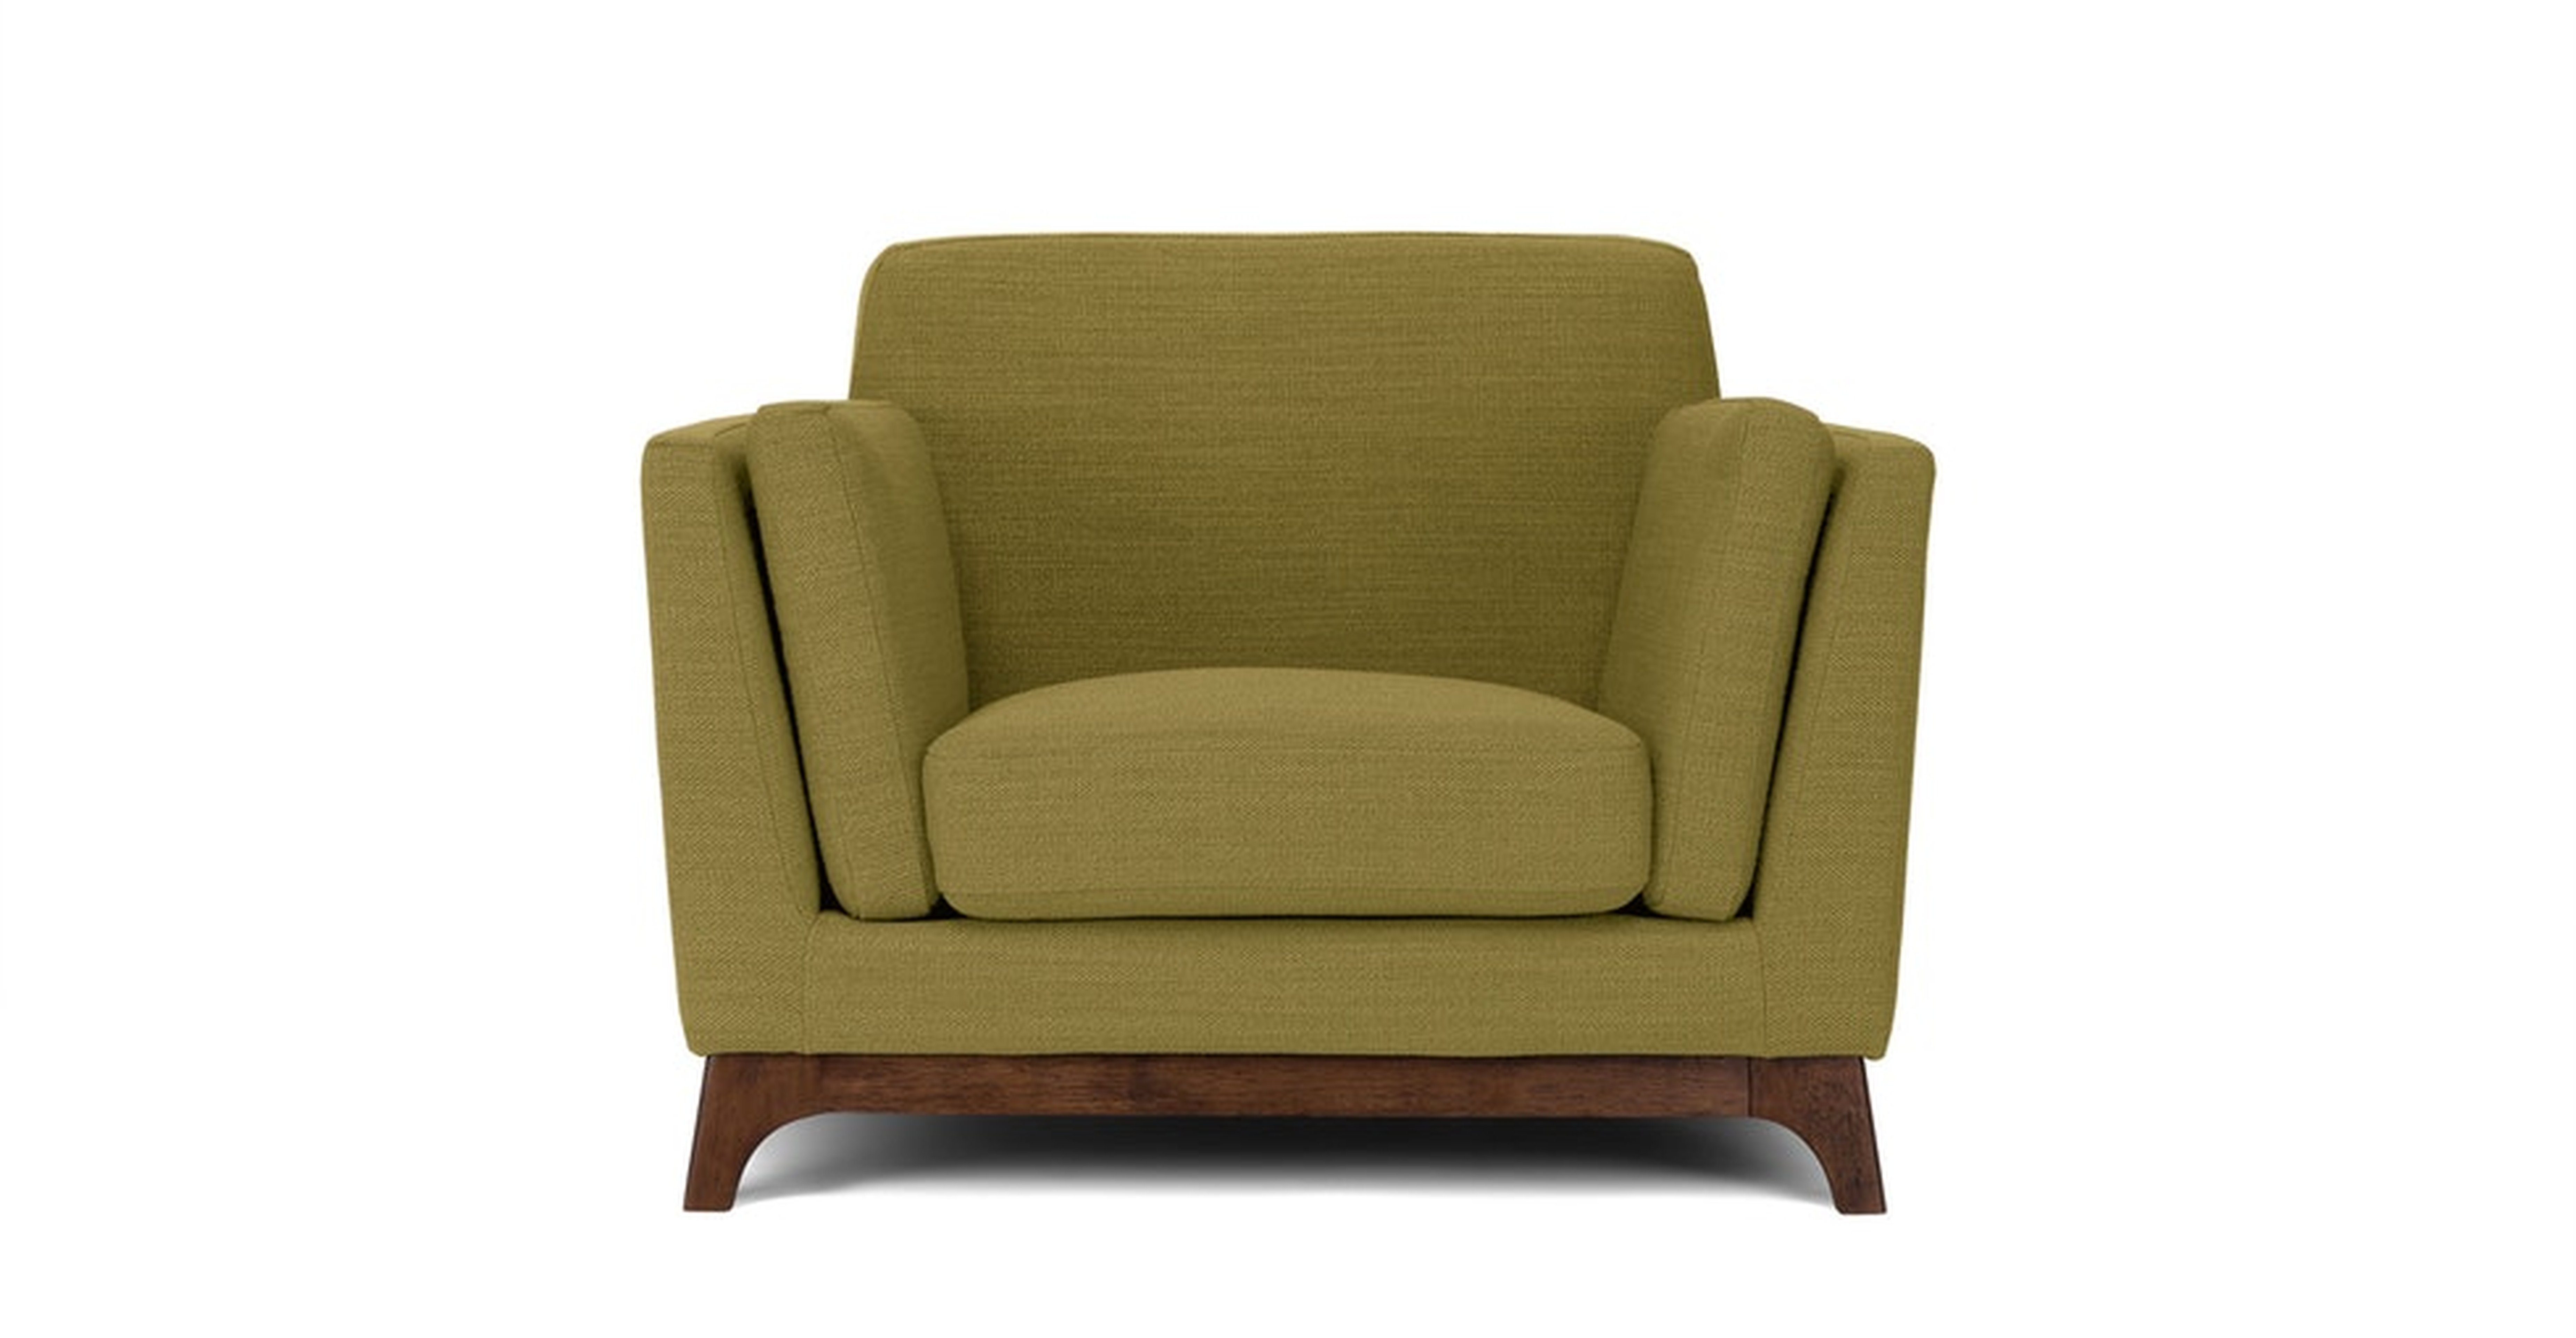 Ceni Seagrass Green Armchair - Article